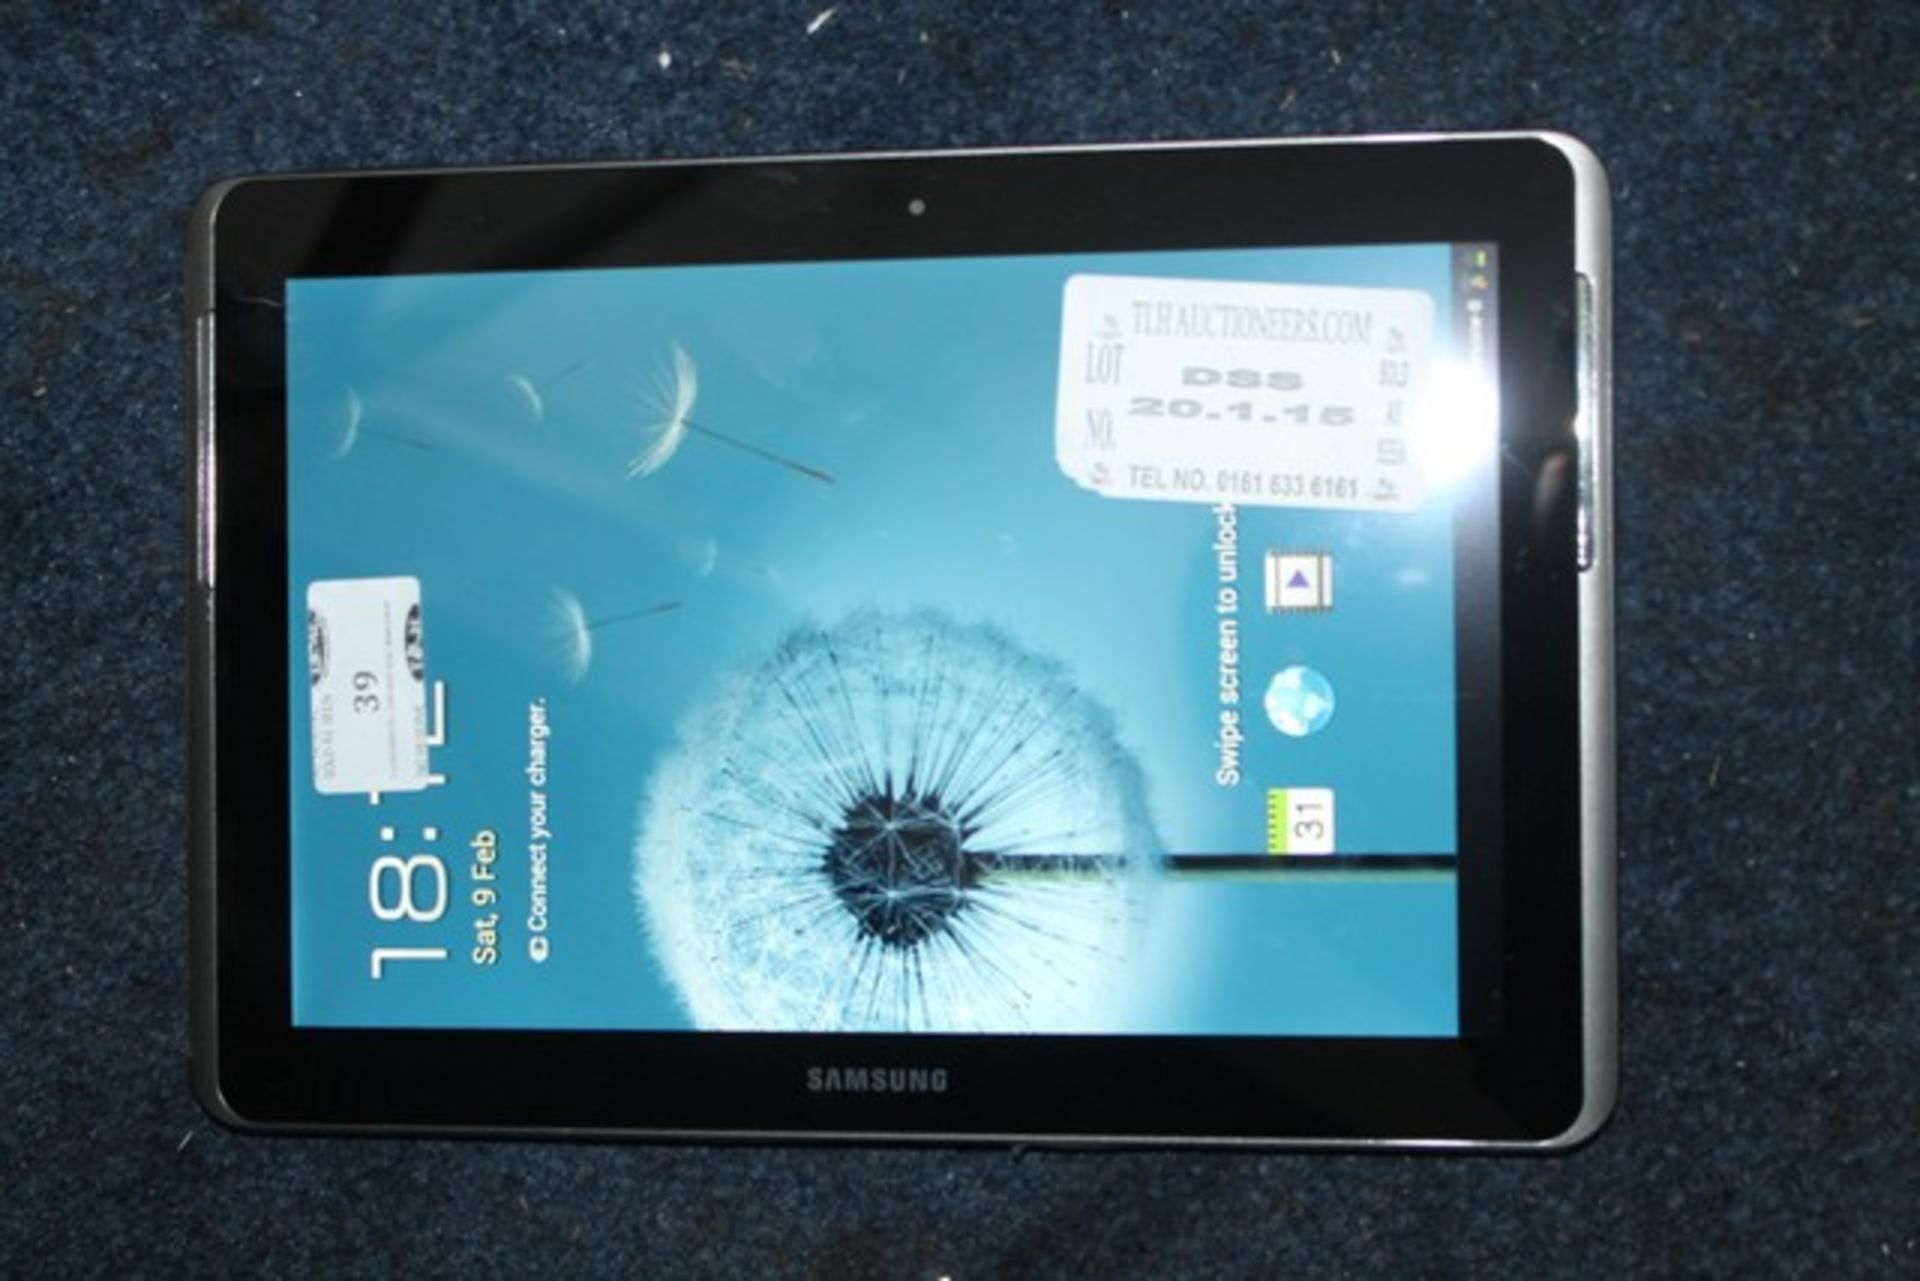 1 x SAMSUNG GTP510 ANDROID TABLET (20/1/2015)  *PLEASE NOTE THAT THE BID PRICE IS MULTIPLIED BY